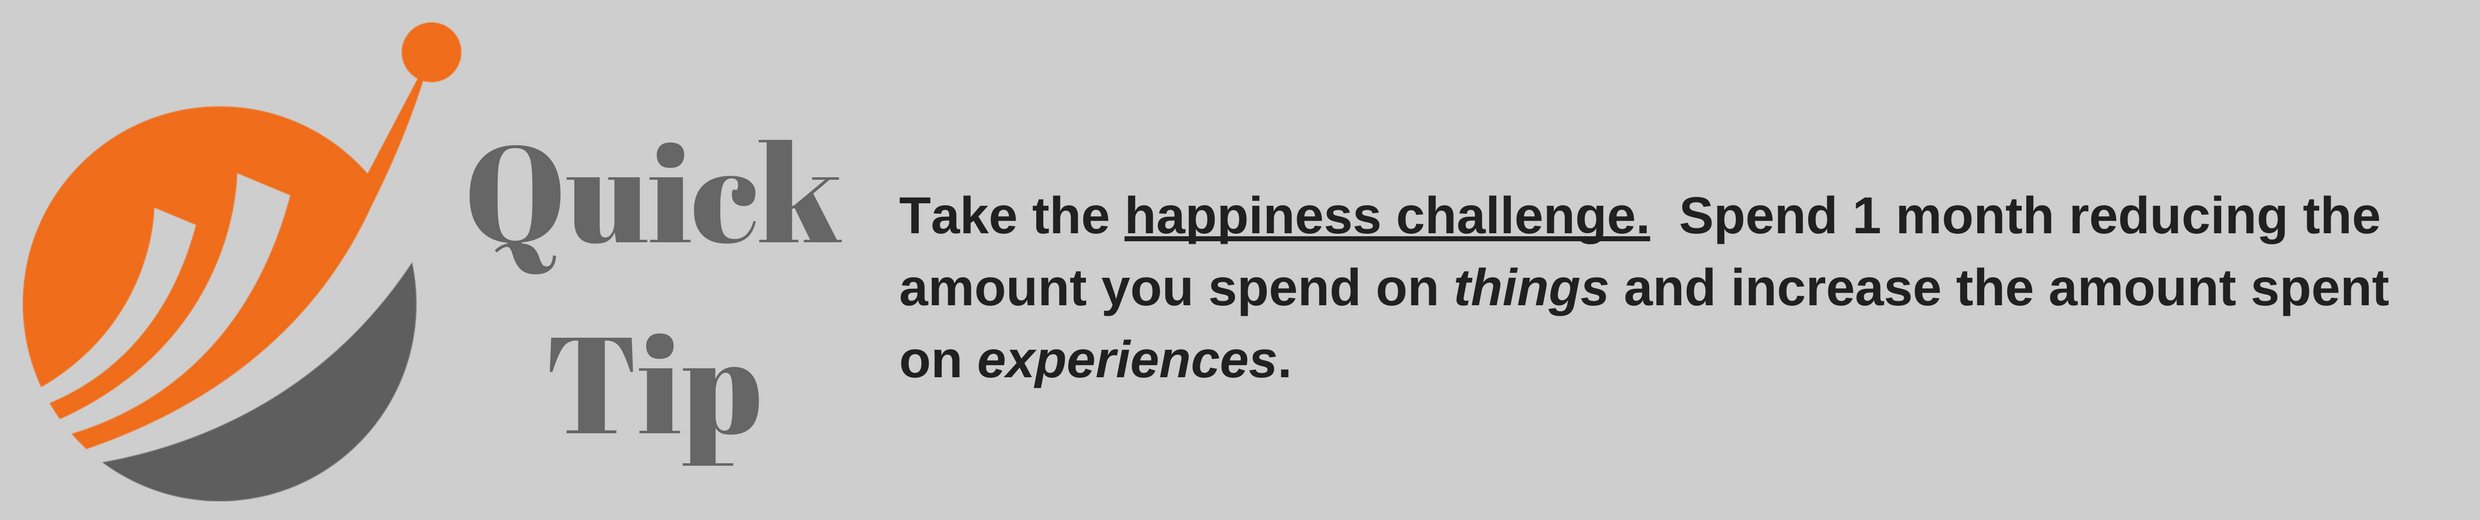 Quick Tip - Happiness